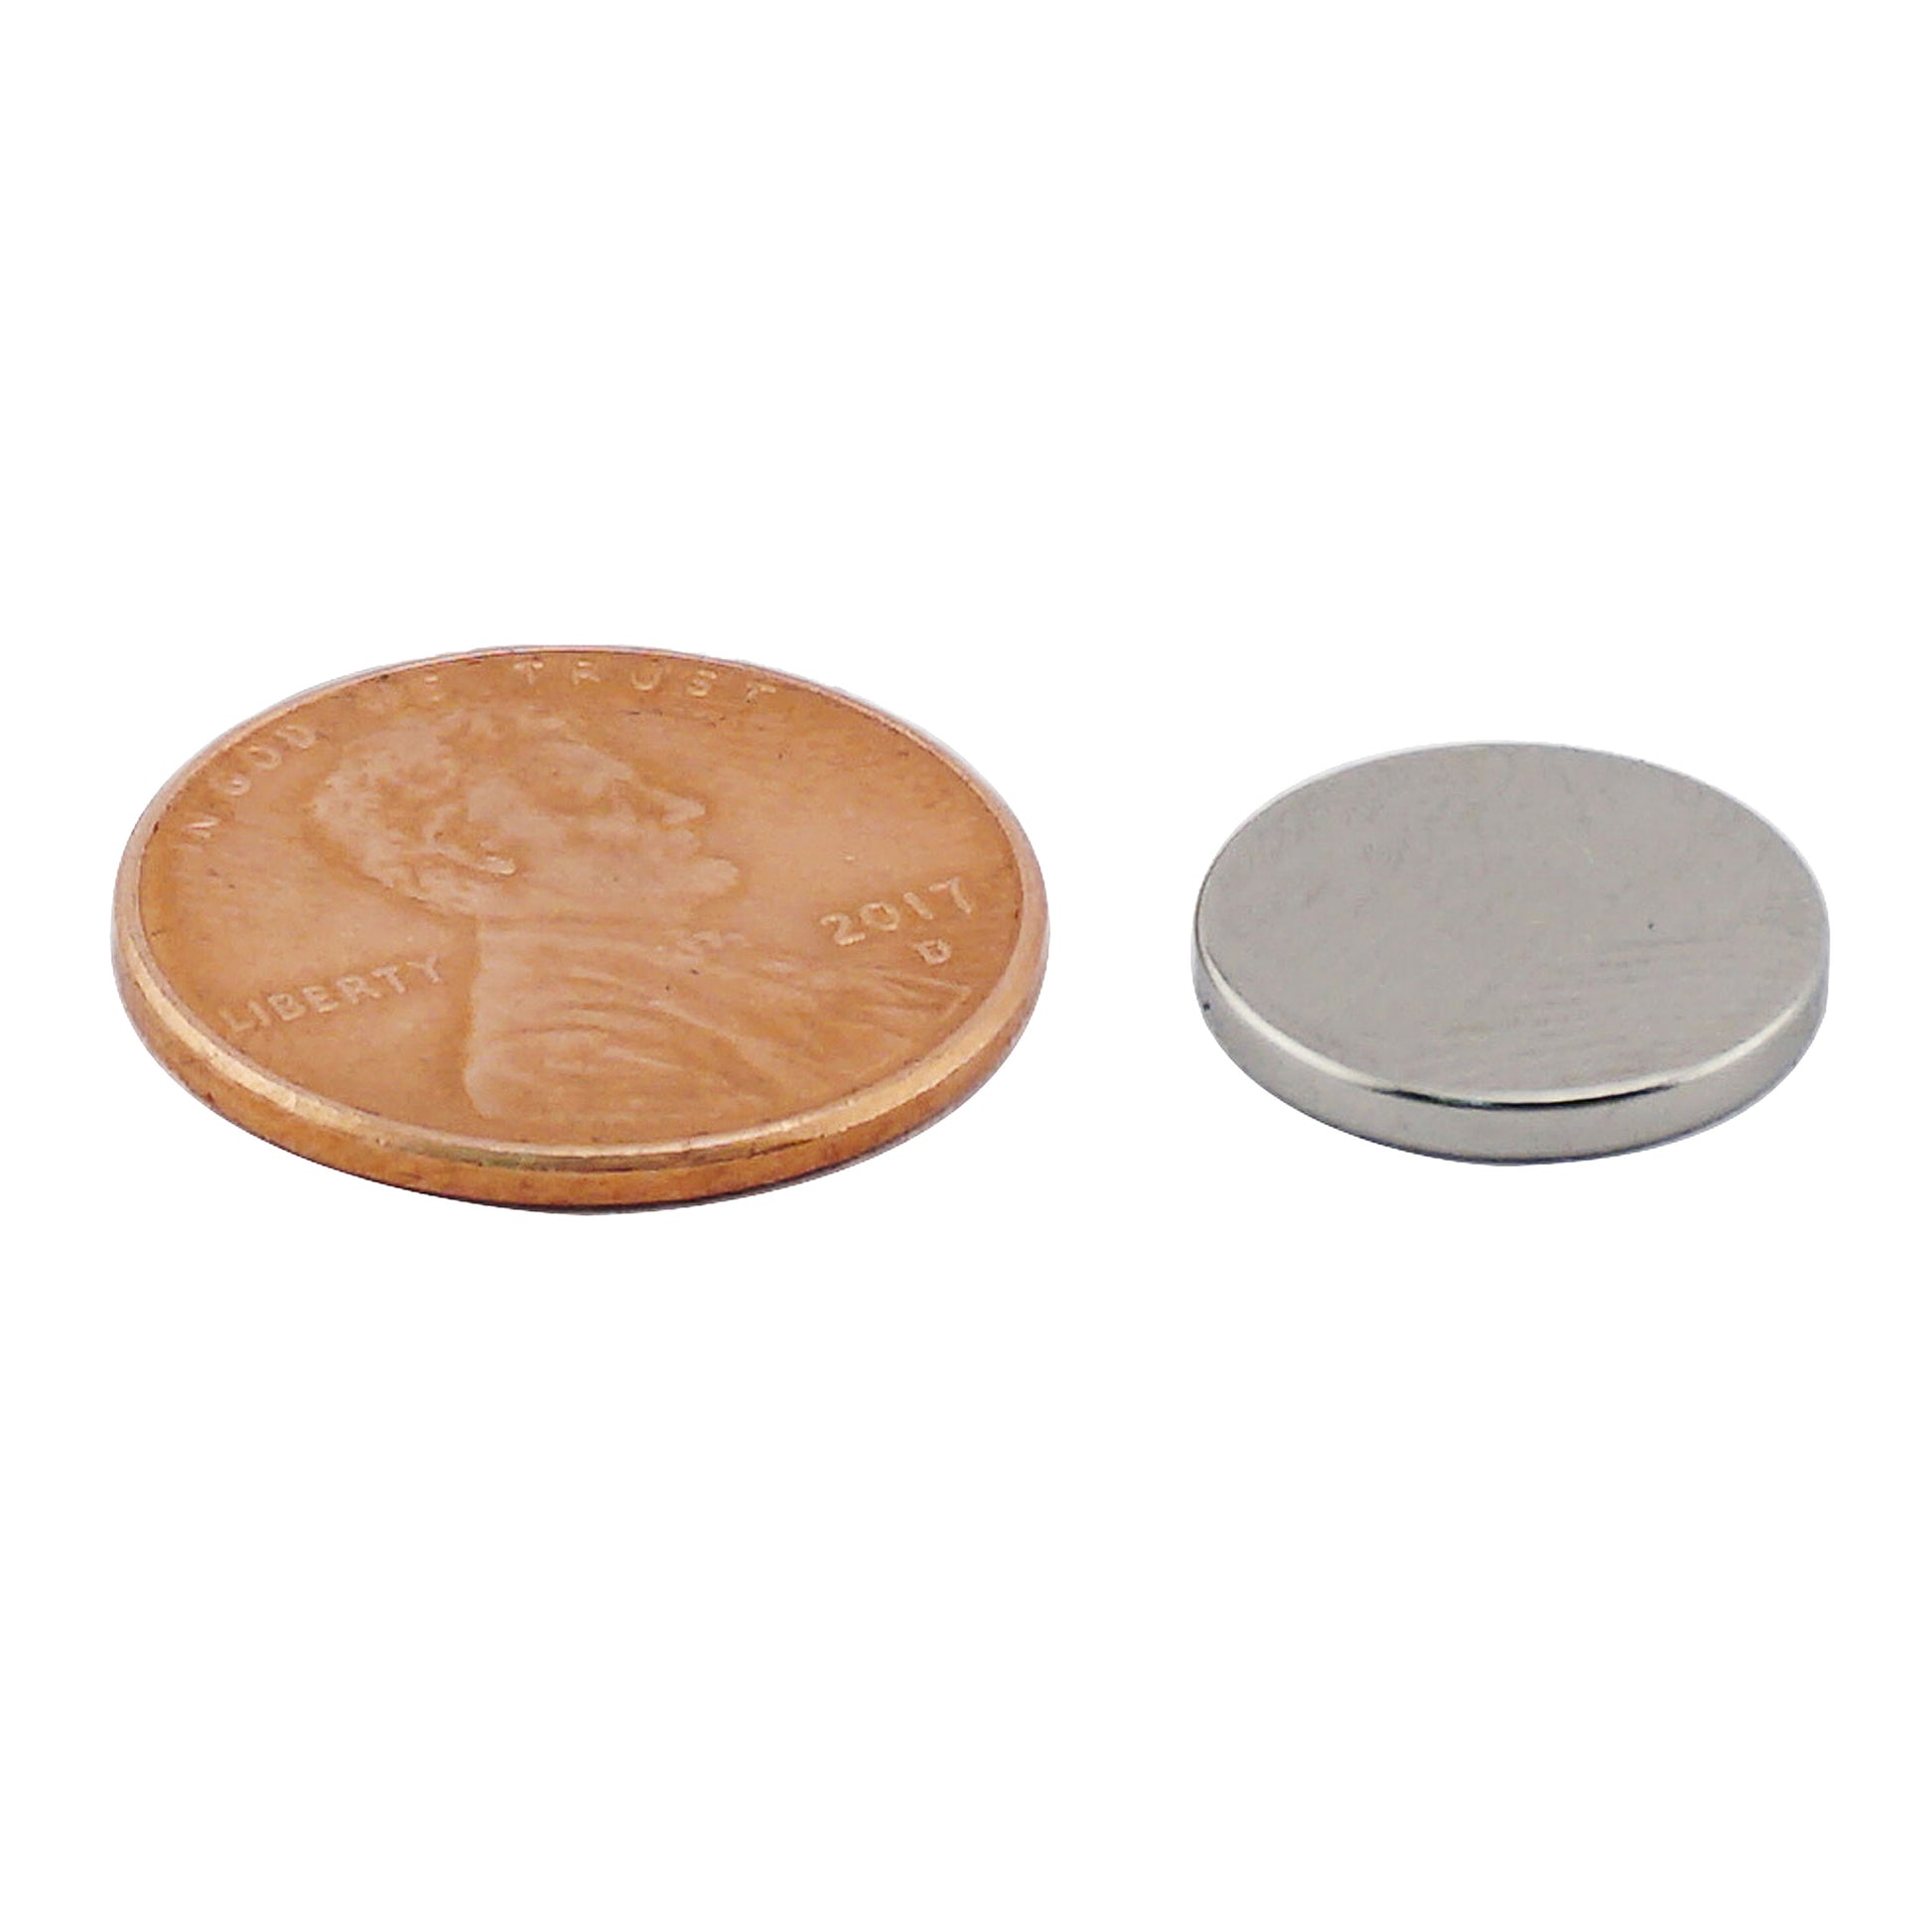 Load image into Gallery viewer, ND45-5006N Neodymium Disc Magnet - Compared to Penny for Size Reference